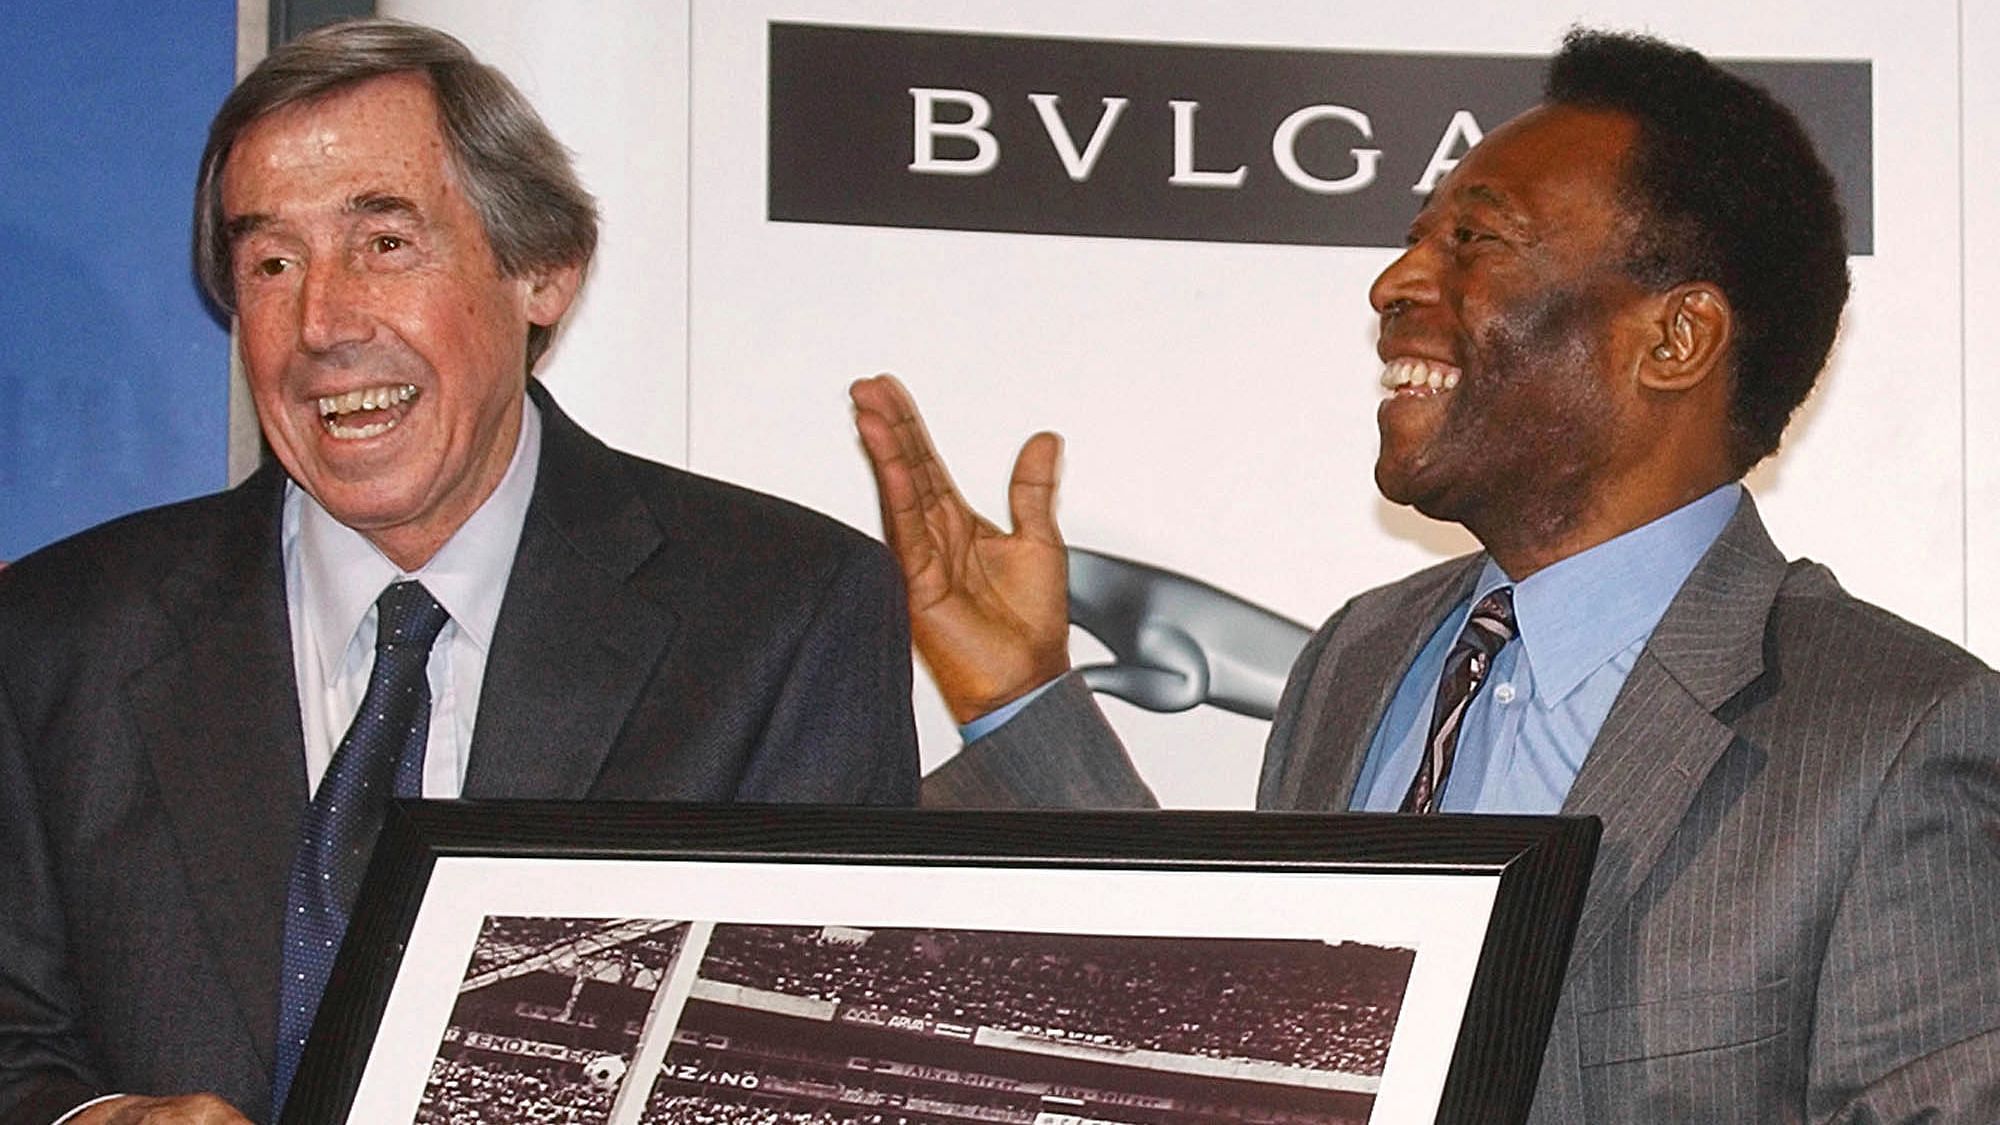 File photo of Brazilian soccer legend Pele (right) presenting former England goalkeeper Gordon Banks with a photograph showing Banks saving a header from Pele in the 1970 World Cup.